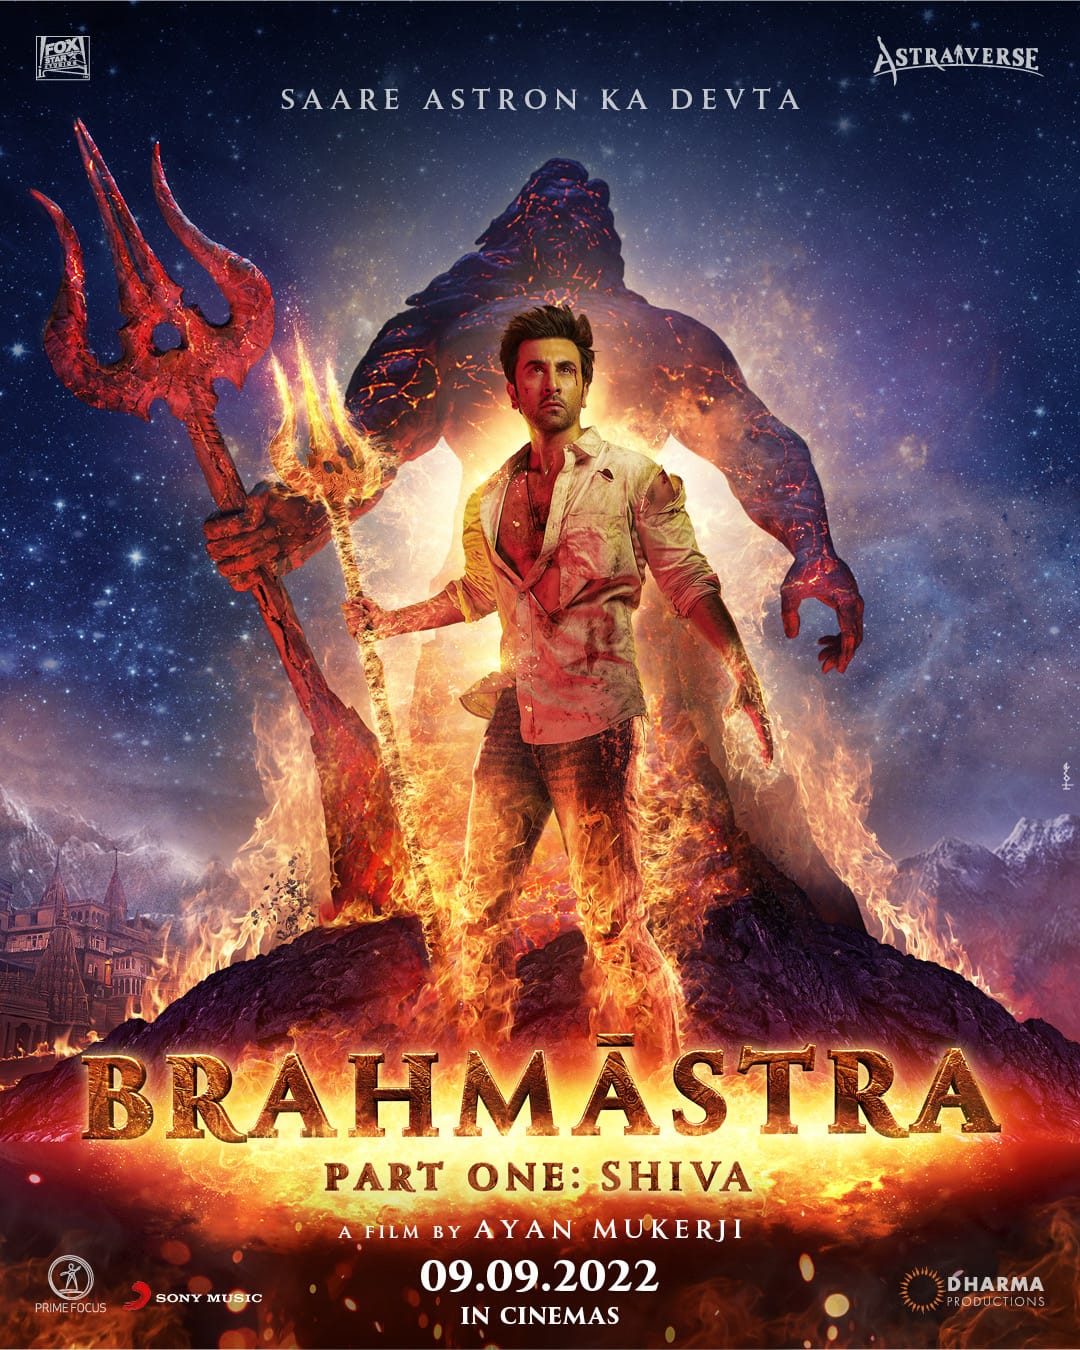 Brahmastra Movie Release Date, Cast, and Reviews.